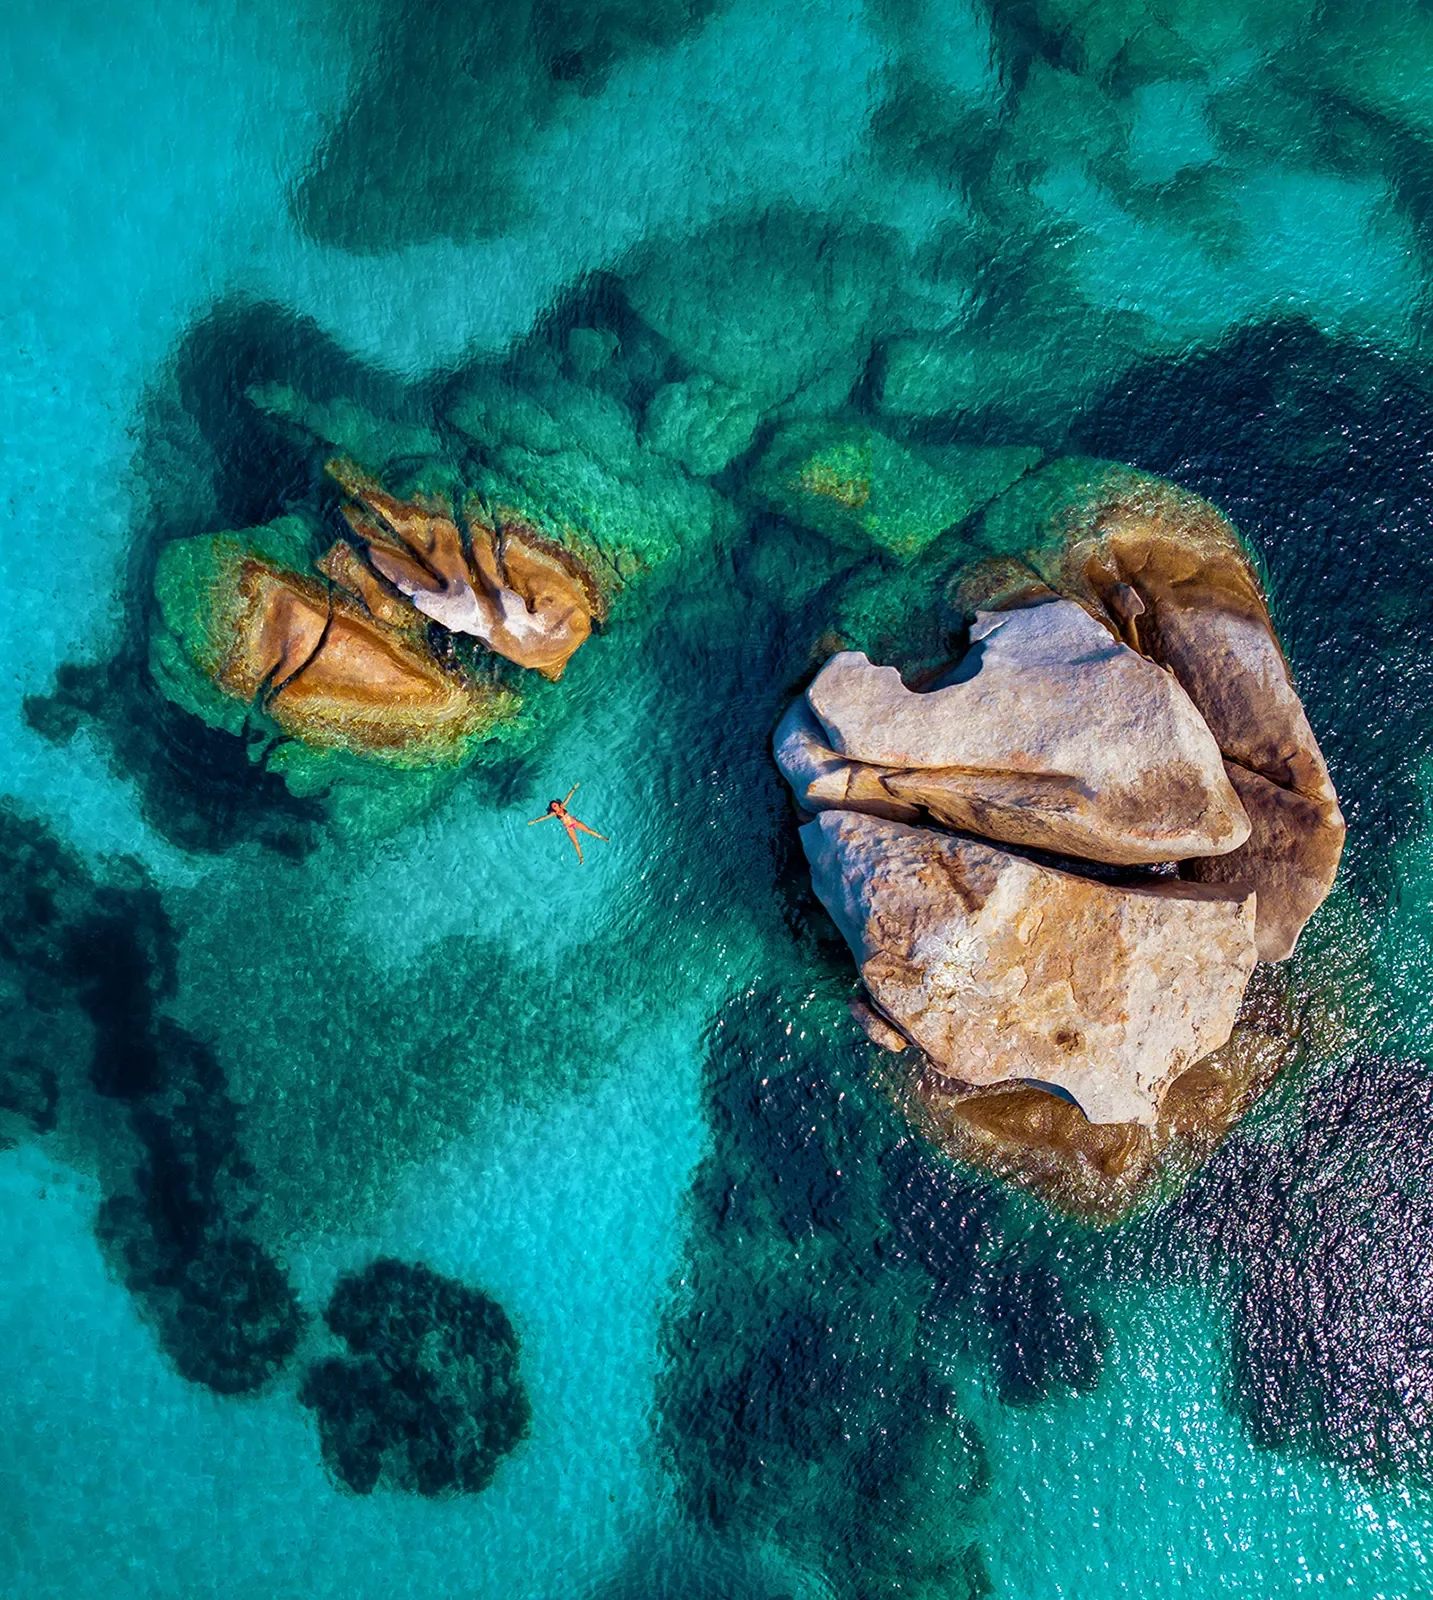 Overhead shot of guest swimming, light blue water, two large rocks.